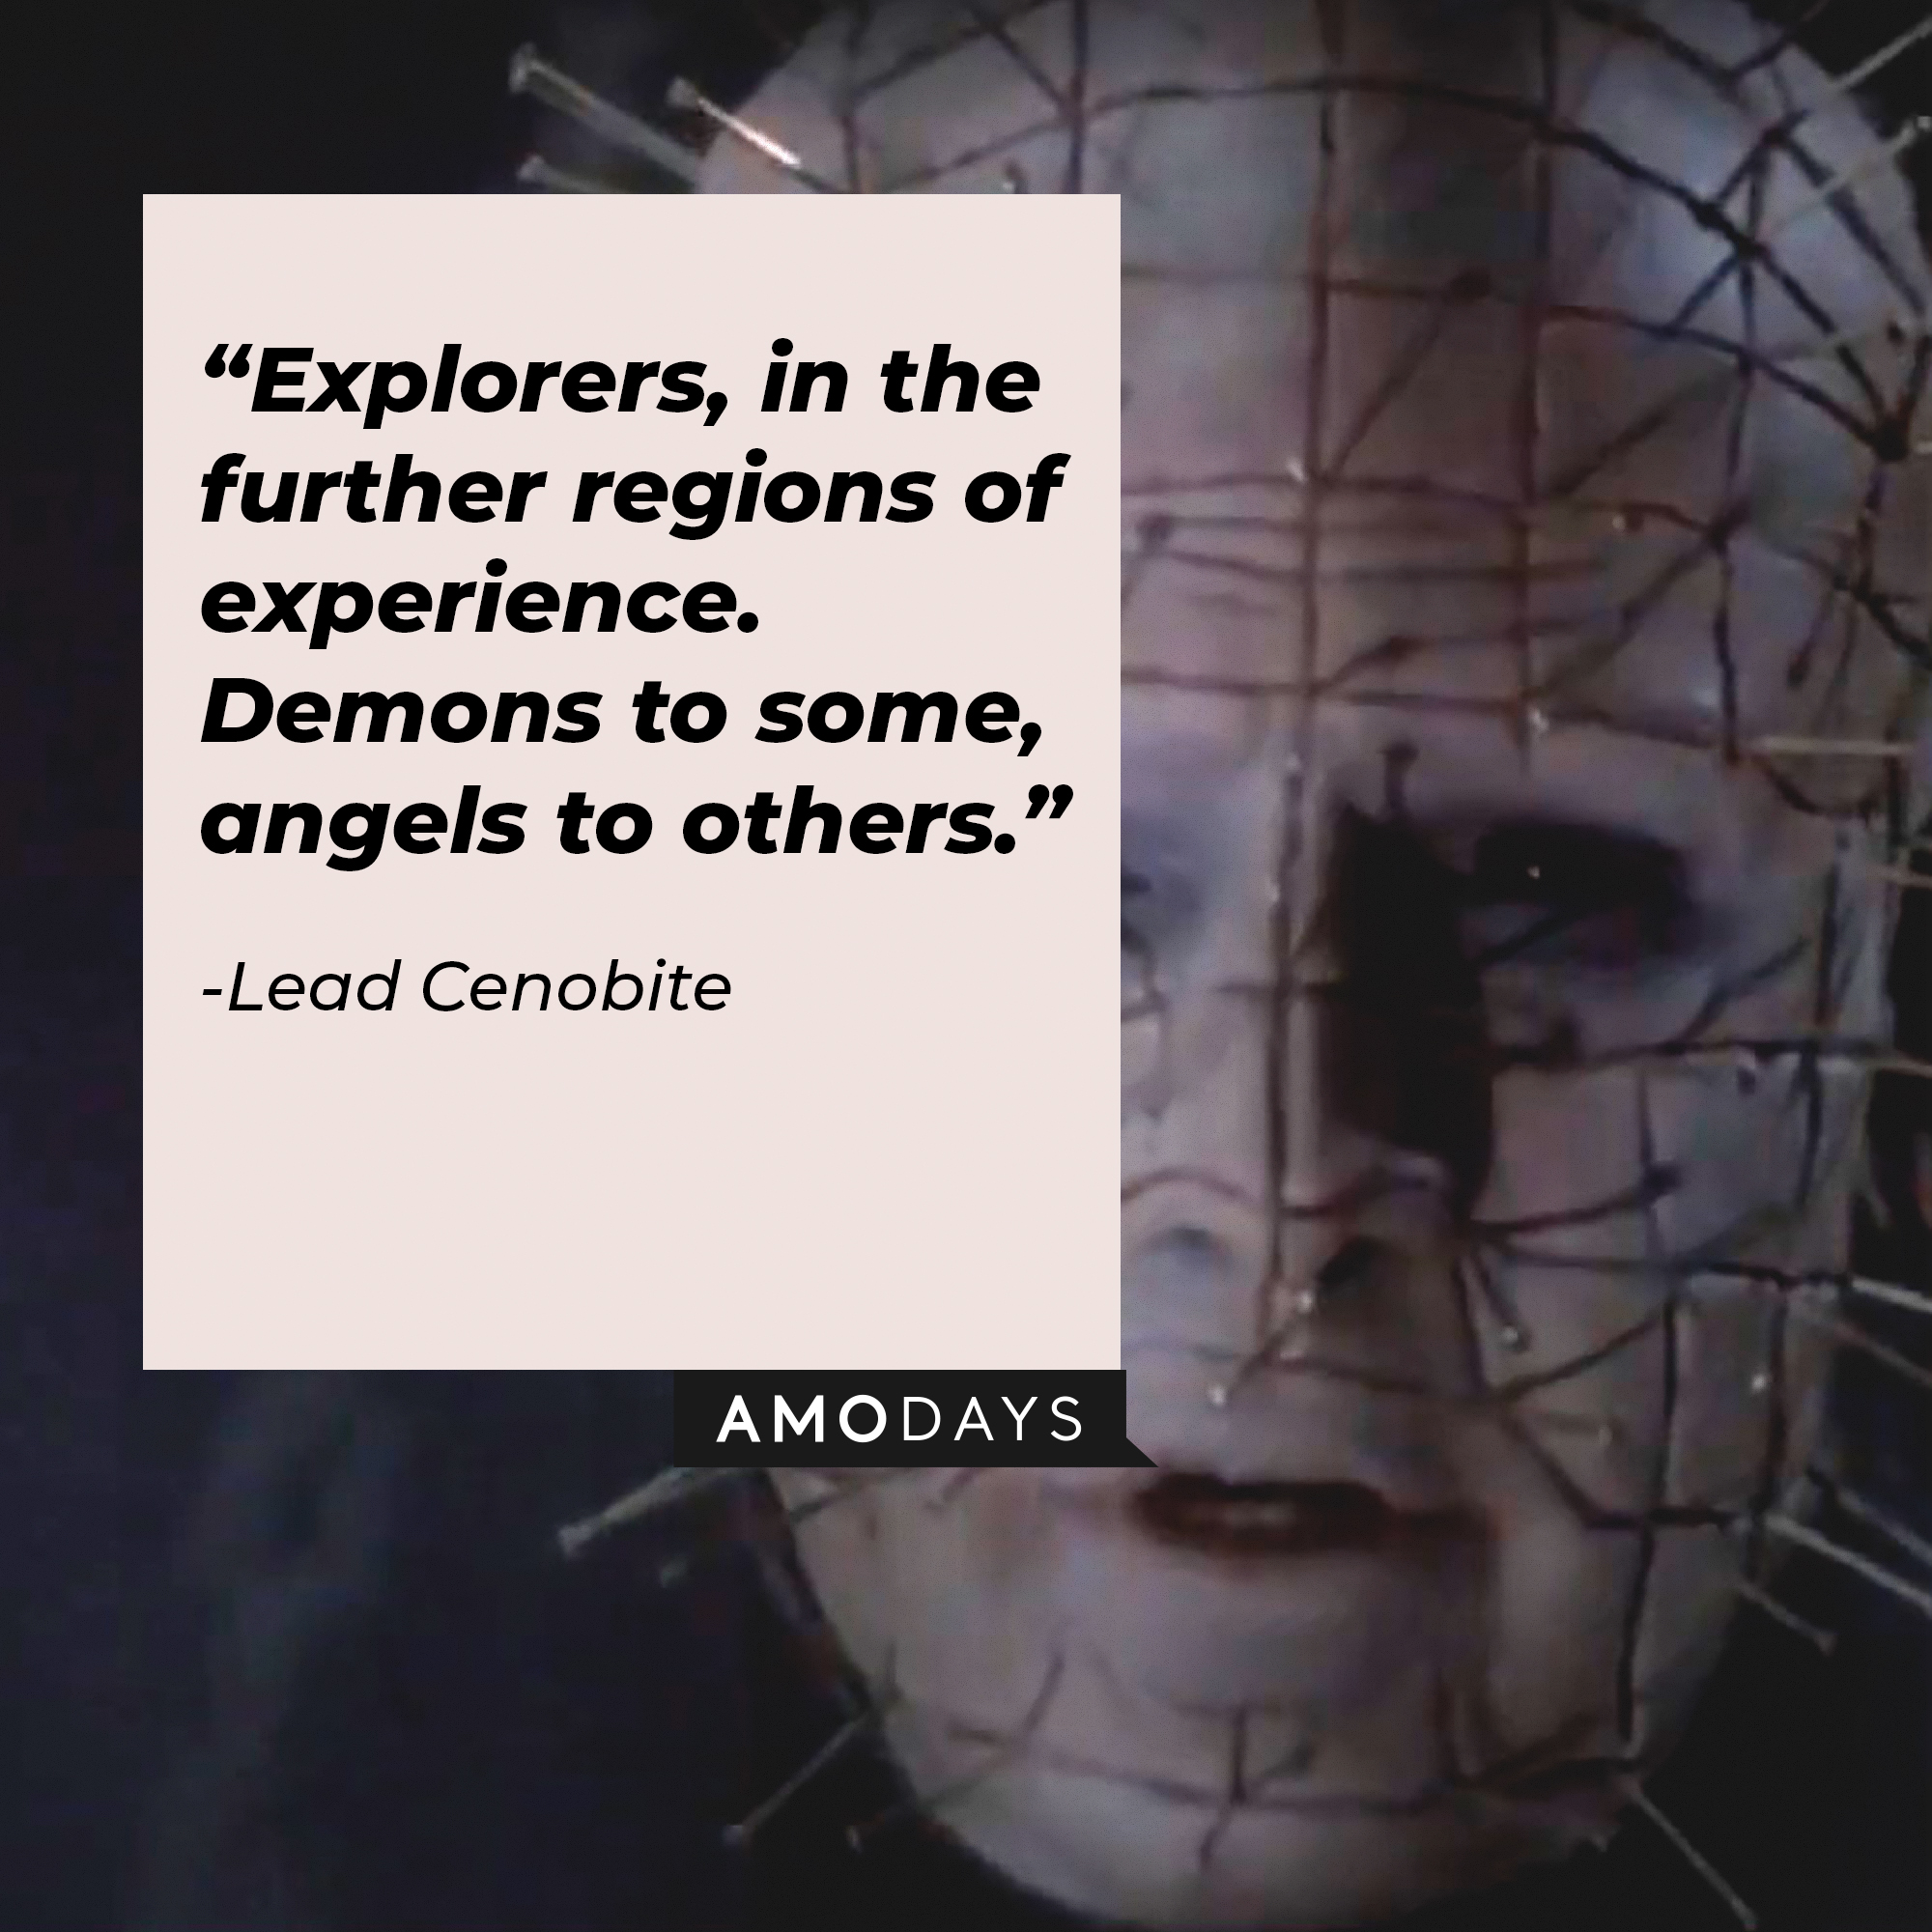 A picture of Pinhead from “Hellraiser” with a quote by Lead Cenobite” that reads, “Explorers, in the further regions of experience. Demons to some, angels to others.” | Image: facebook.com/HellraiserMovies